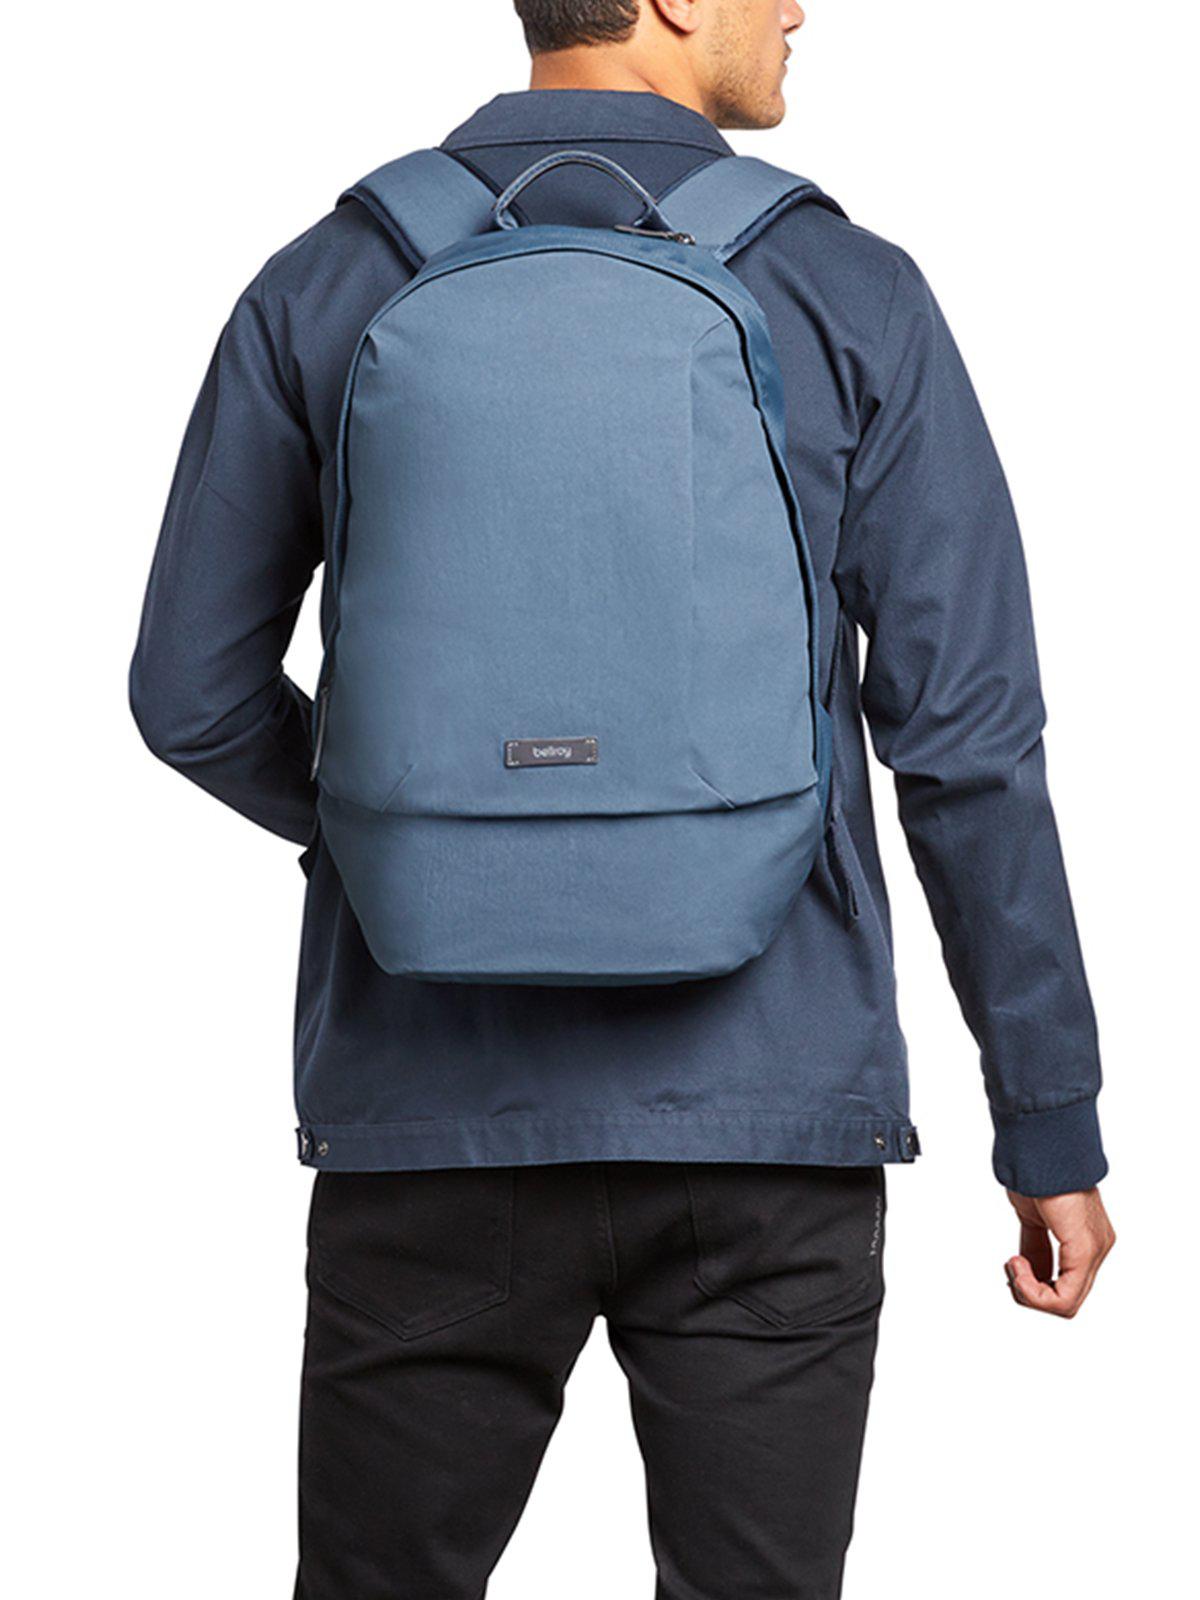 Bellroy Classic Backpack Limestone (Leather-Free)